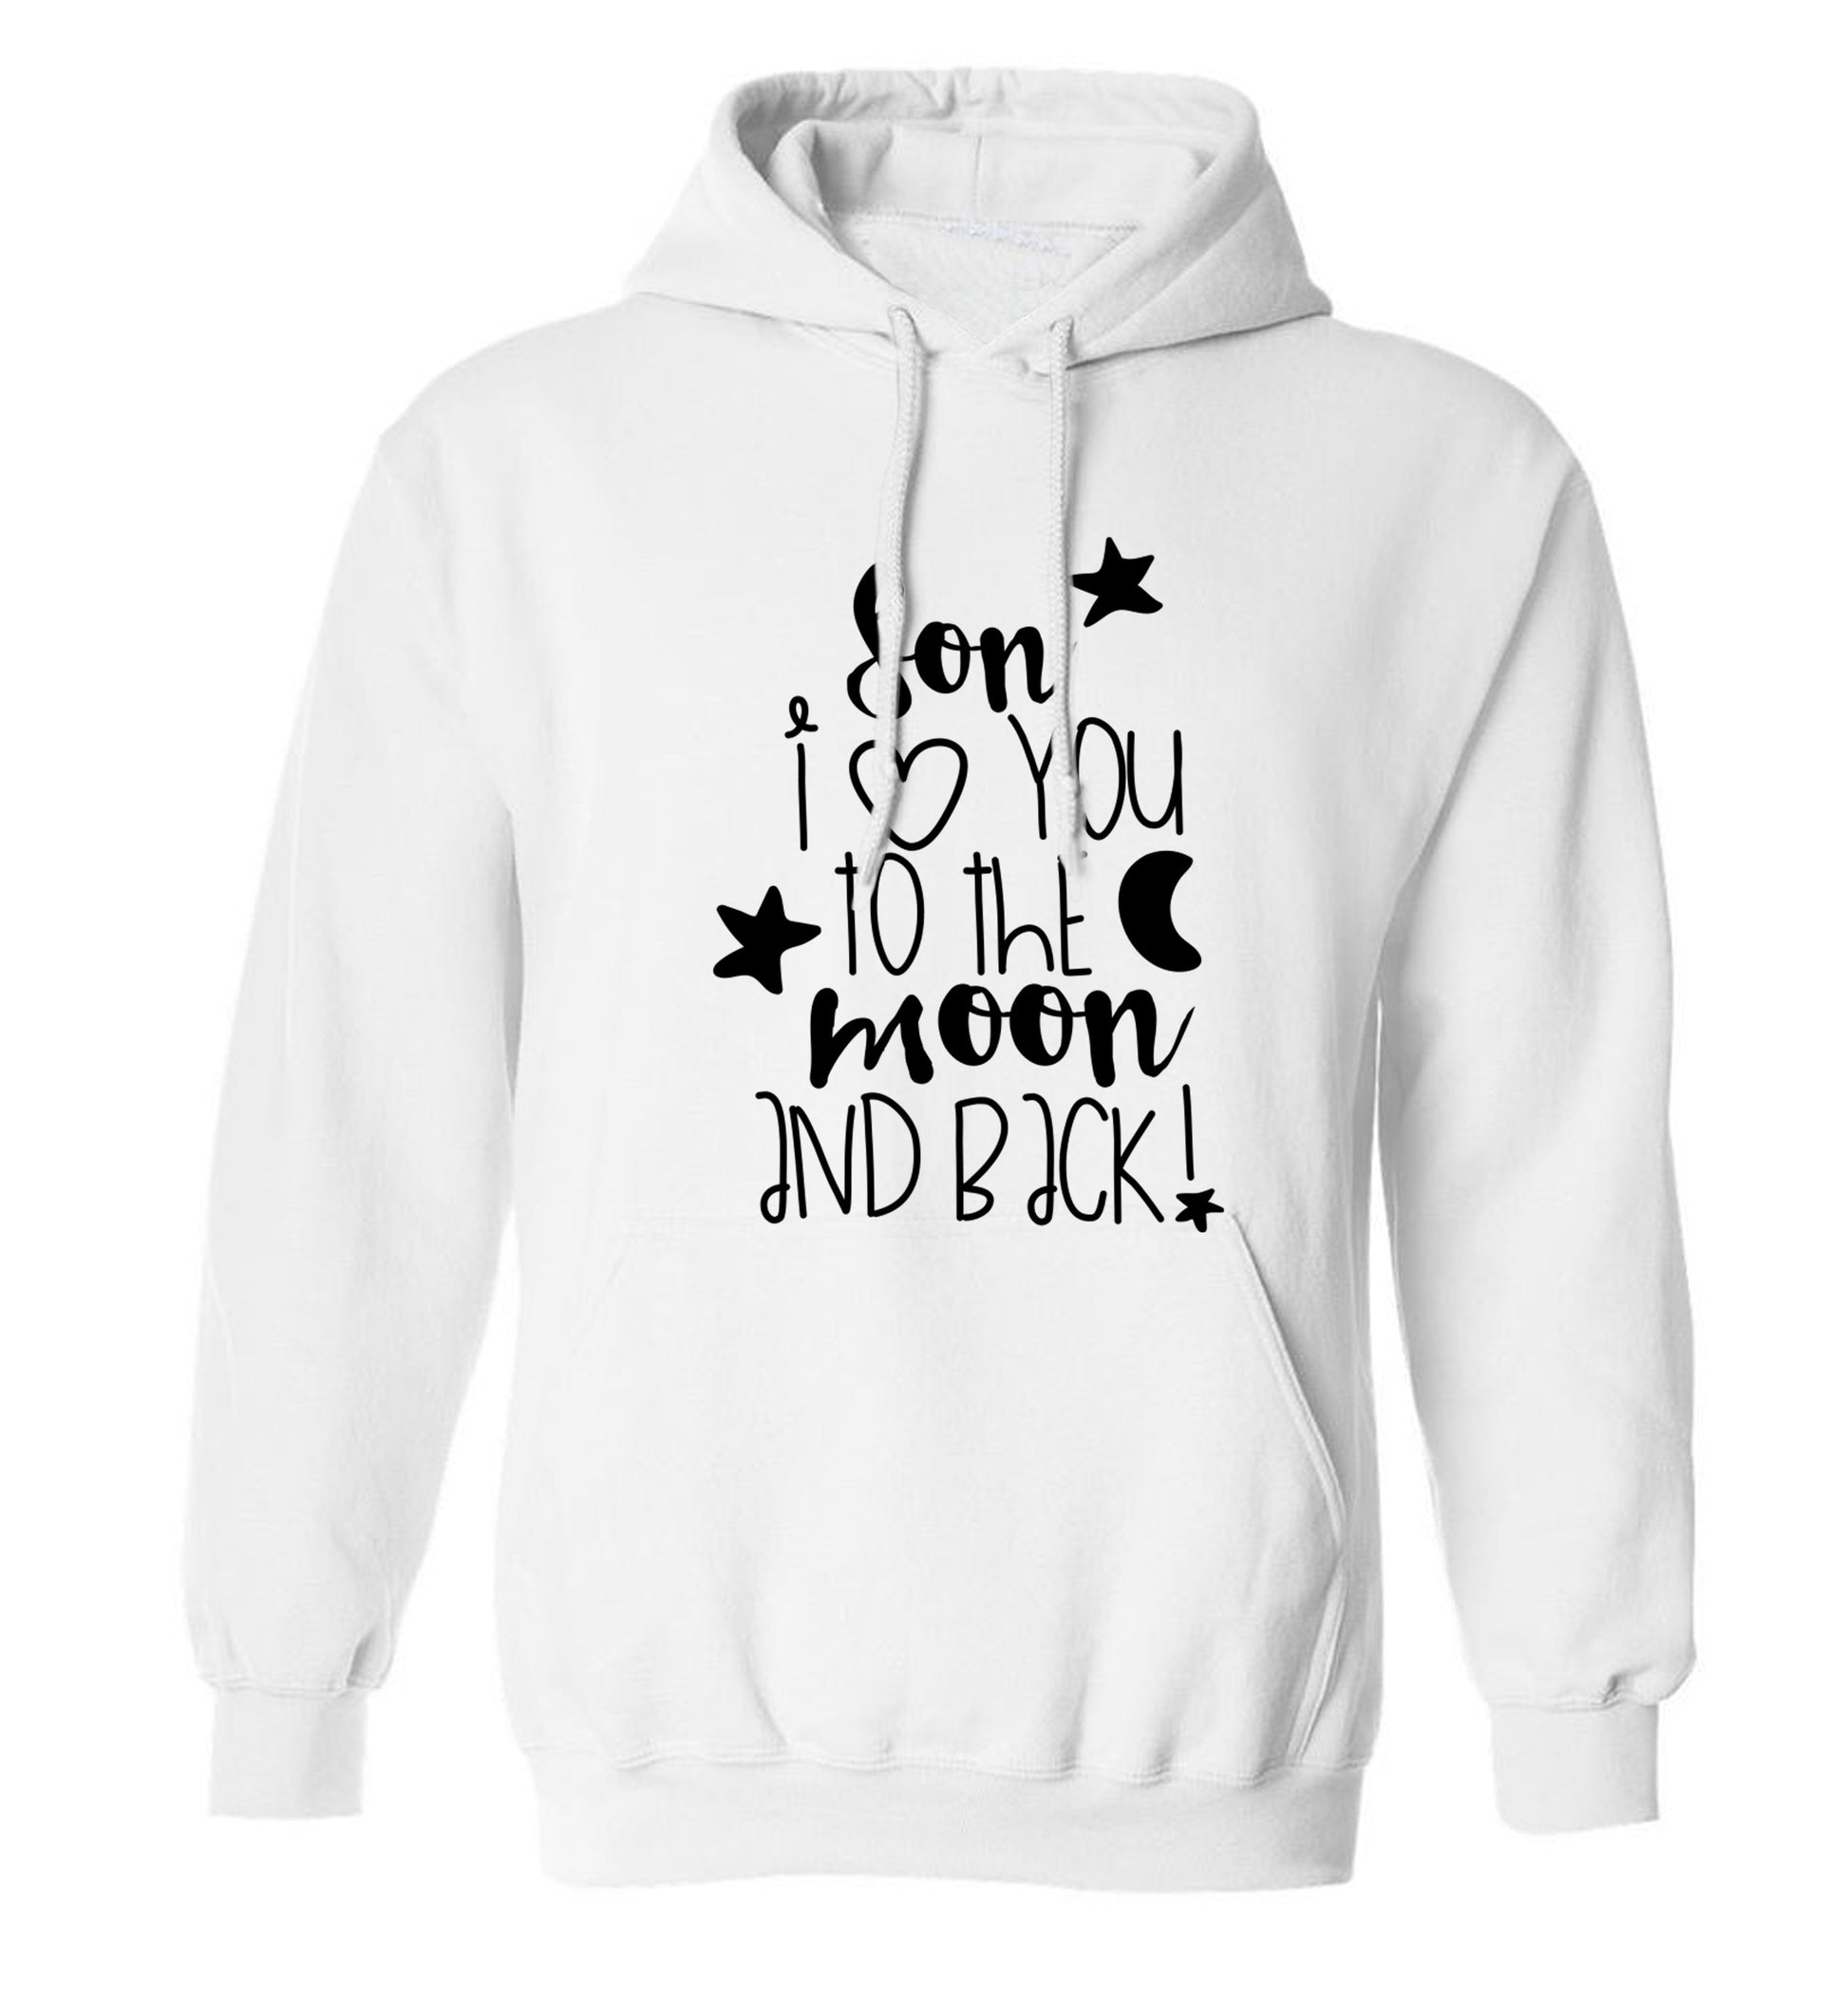 Son I love you to the moon and back adults unisex white hoodie 2XL